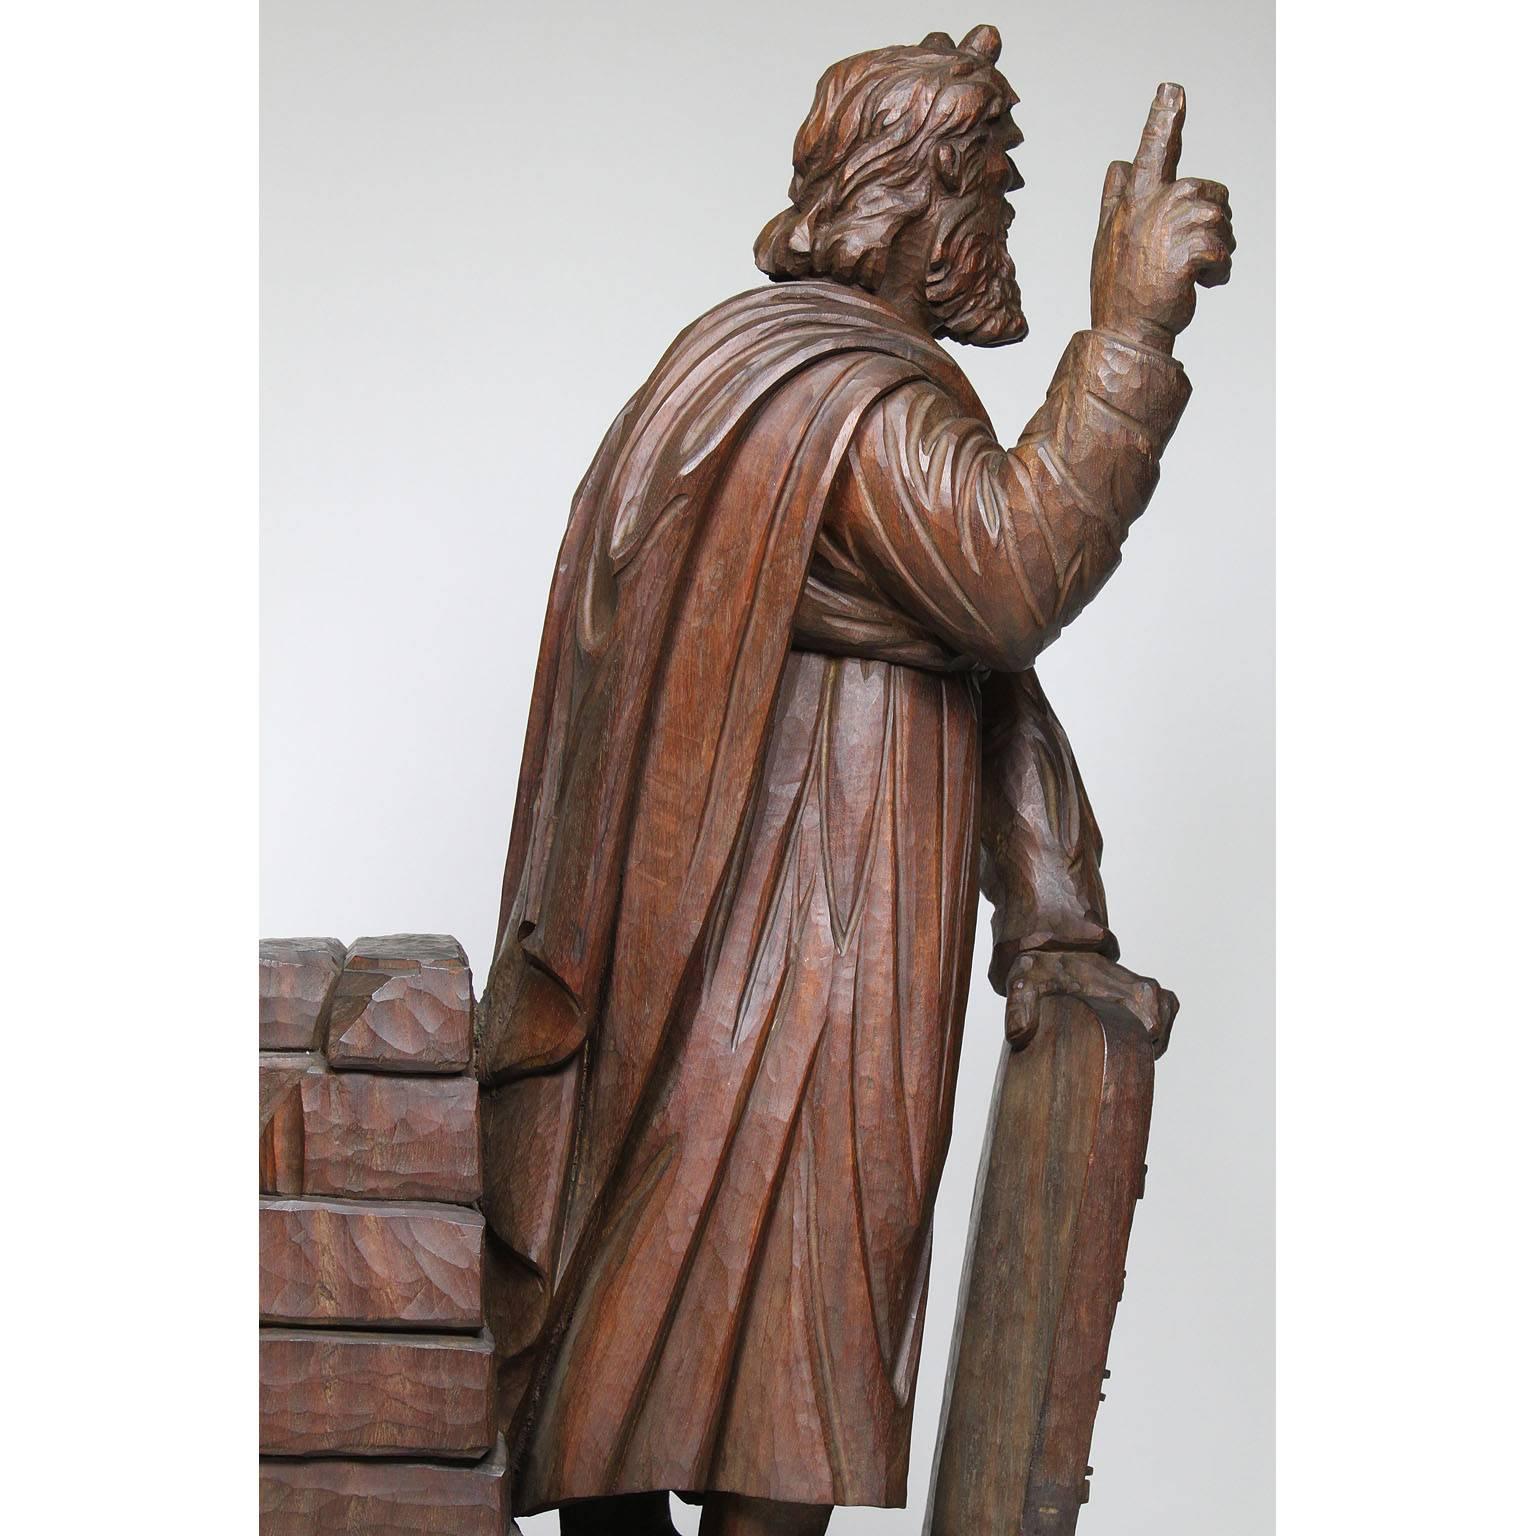 19th-20th Century Renaissance Carved Wood Judica Figure of Michelangelo's Moses For Sale 1